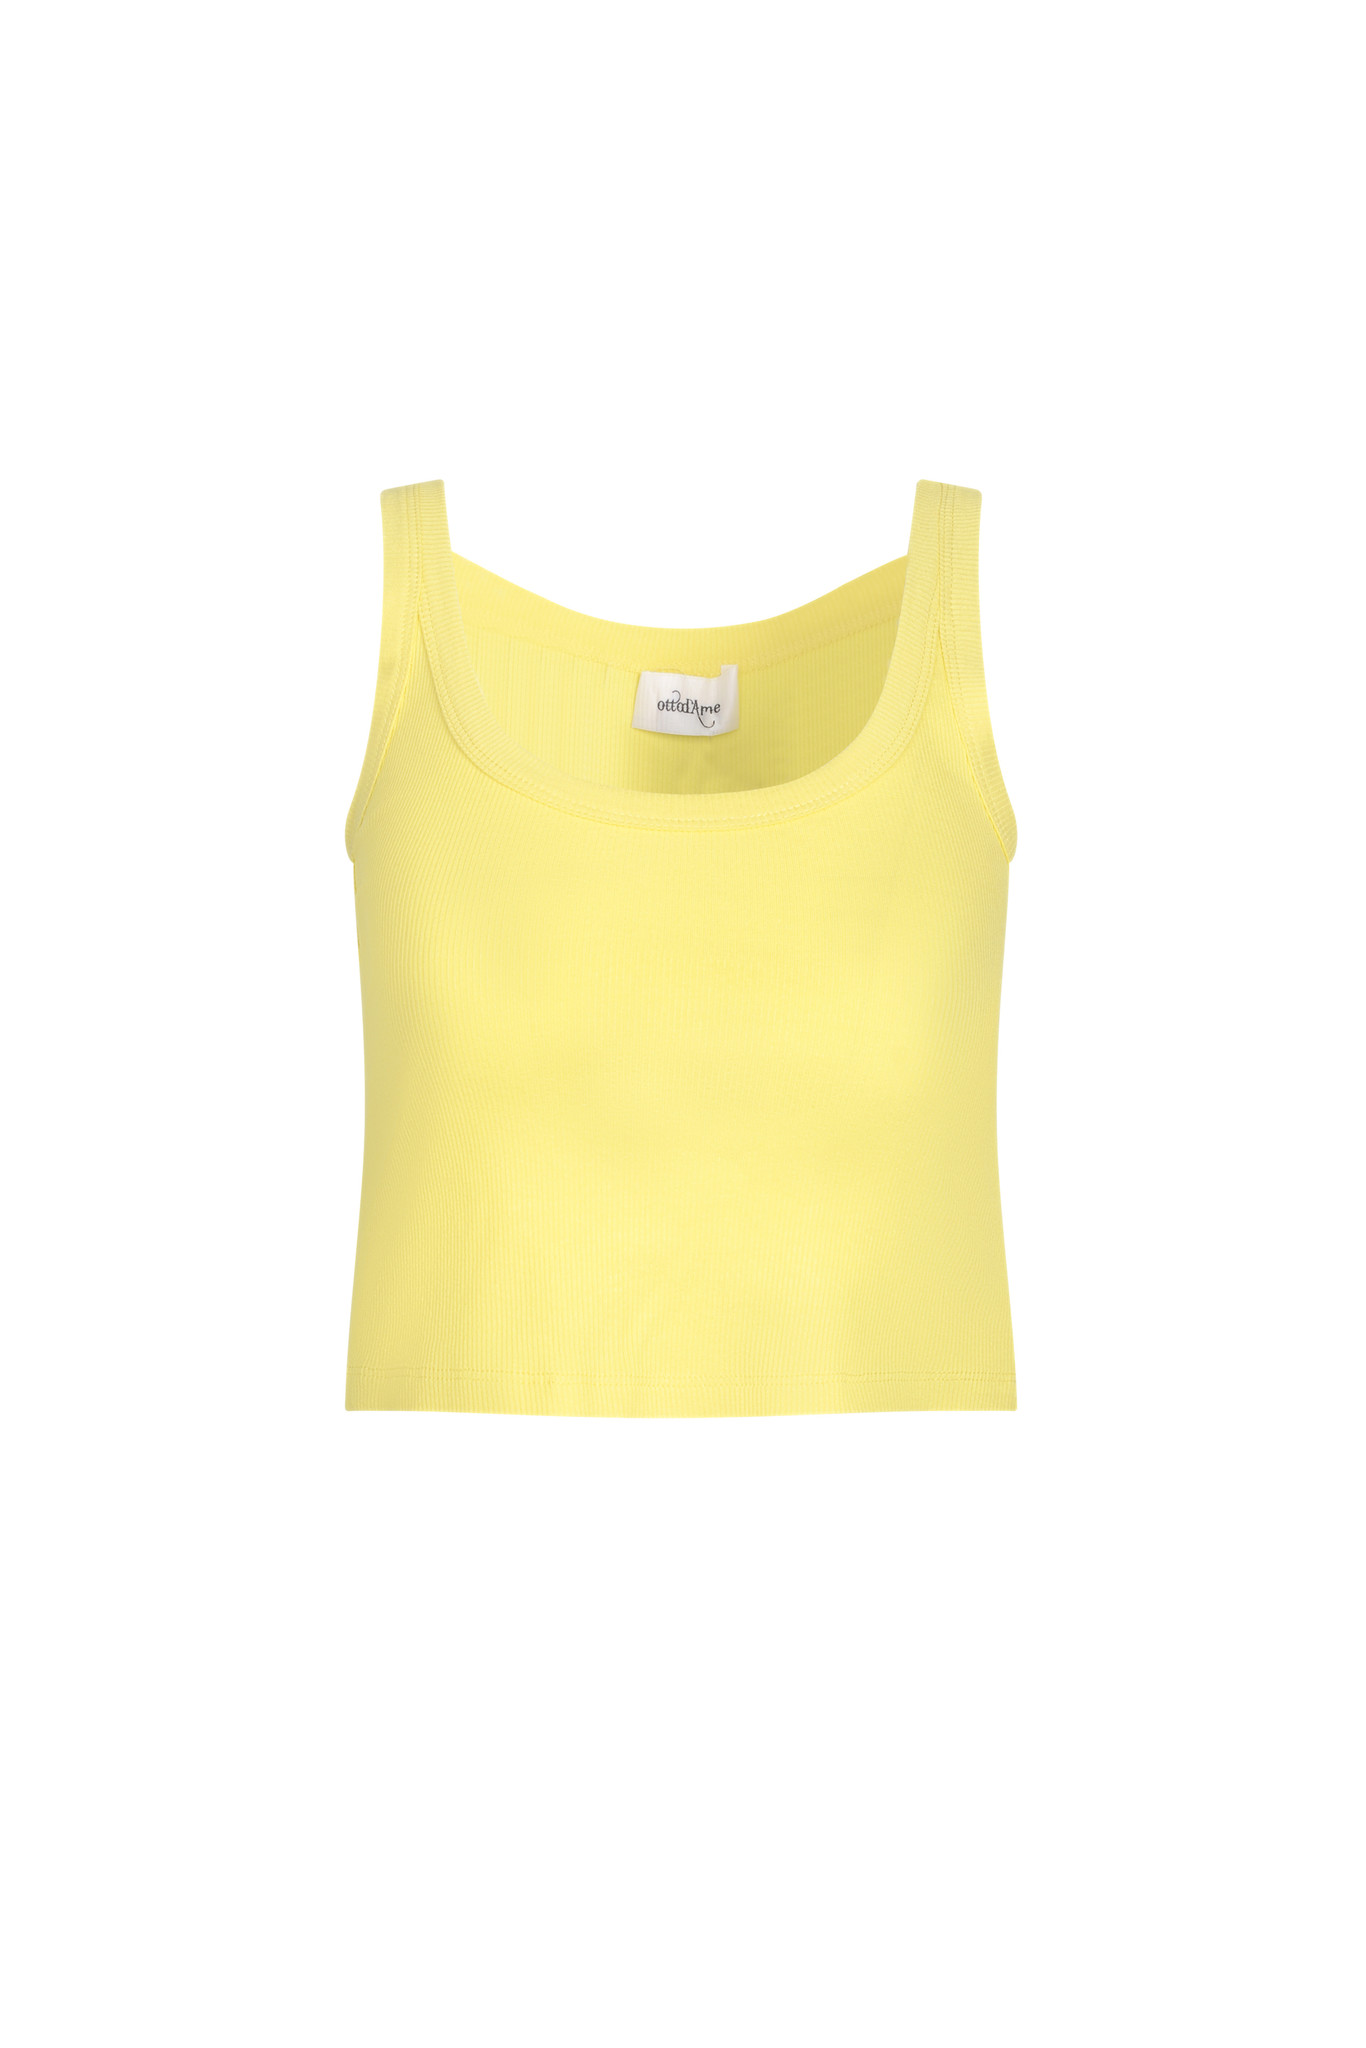 Ribbed Crop Tank in Yellow-1